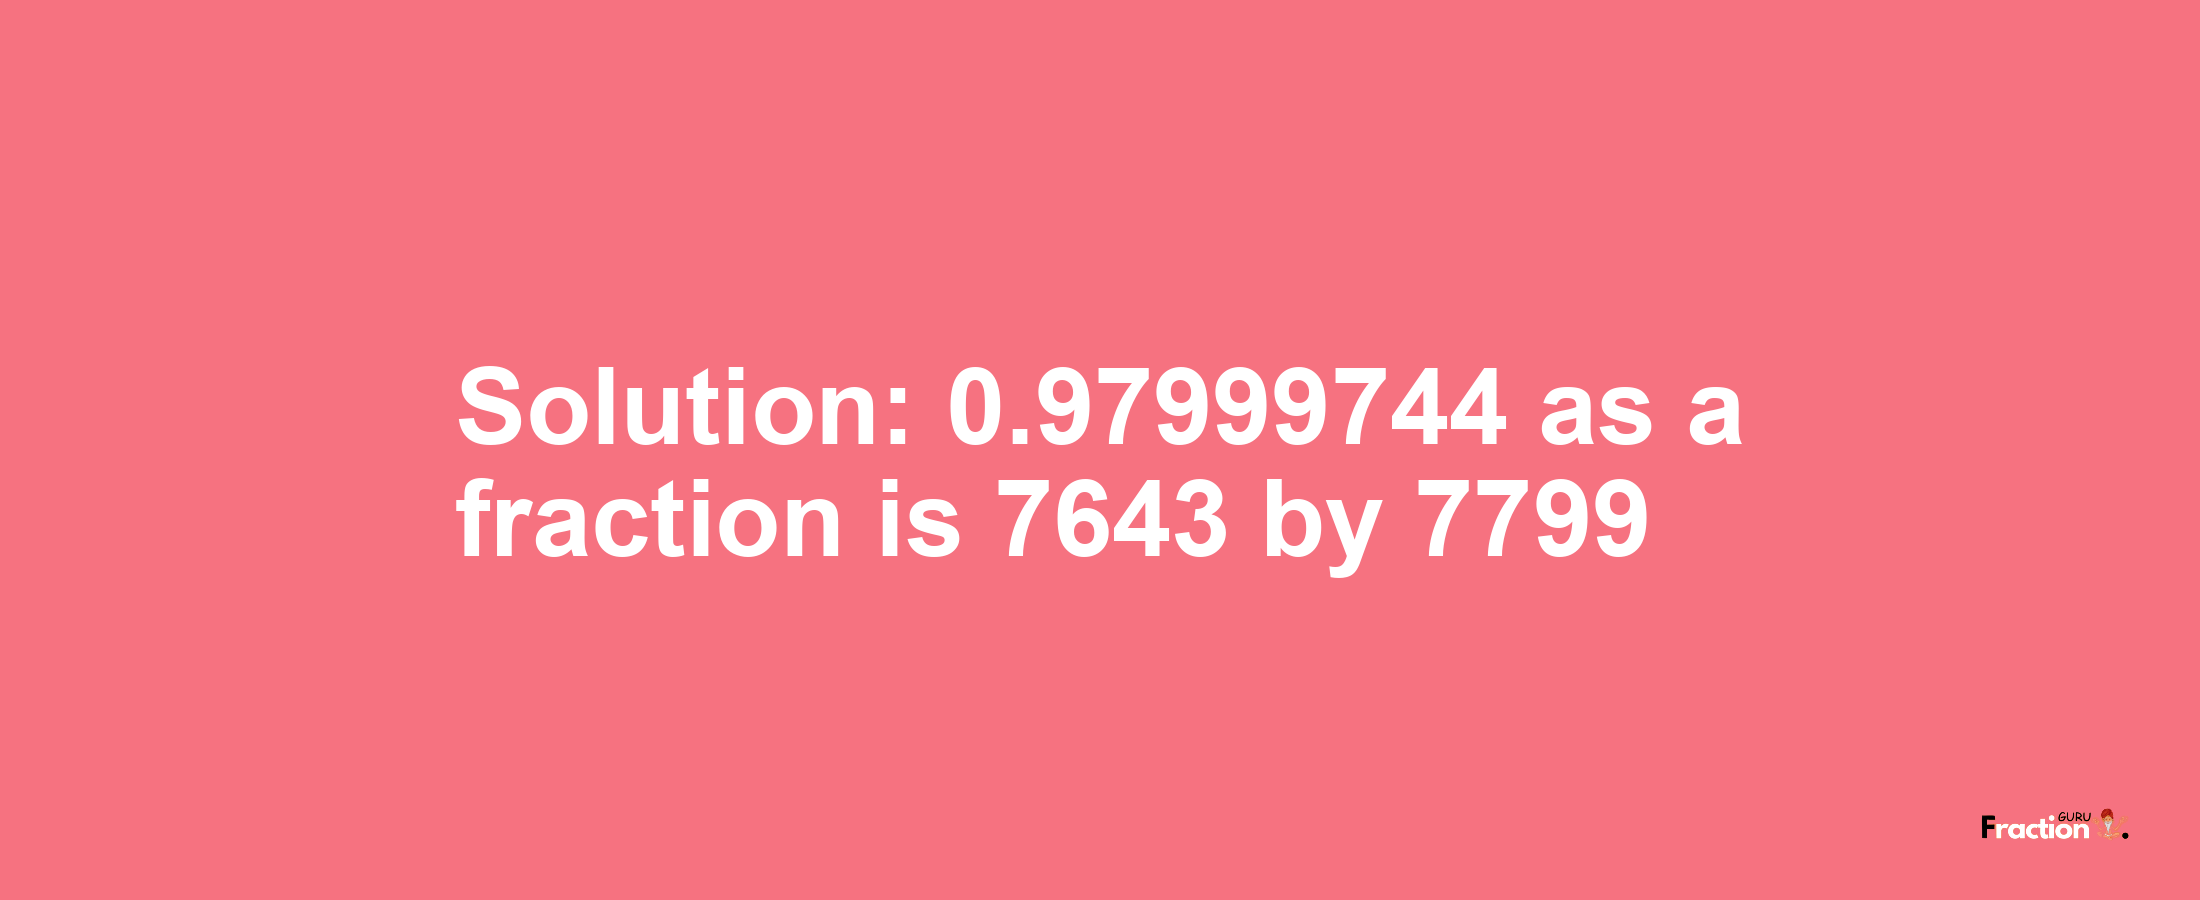 Solution:0.97999744 as a fraction is 7643/7799